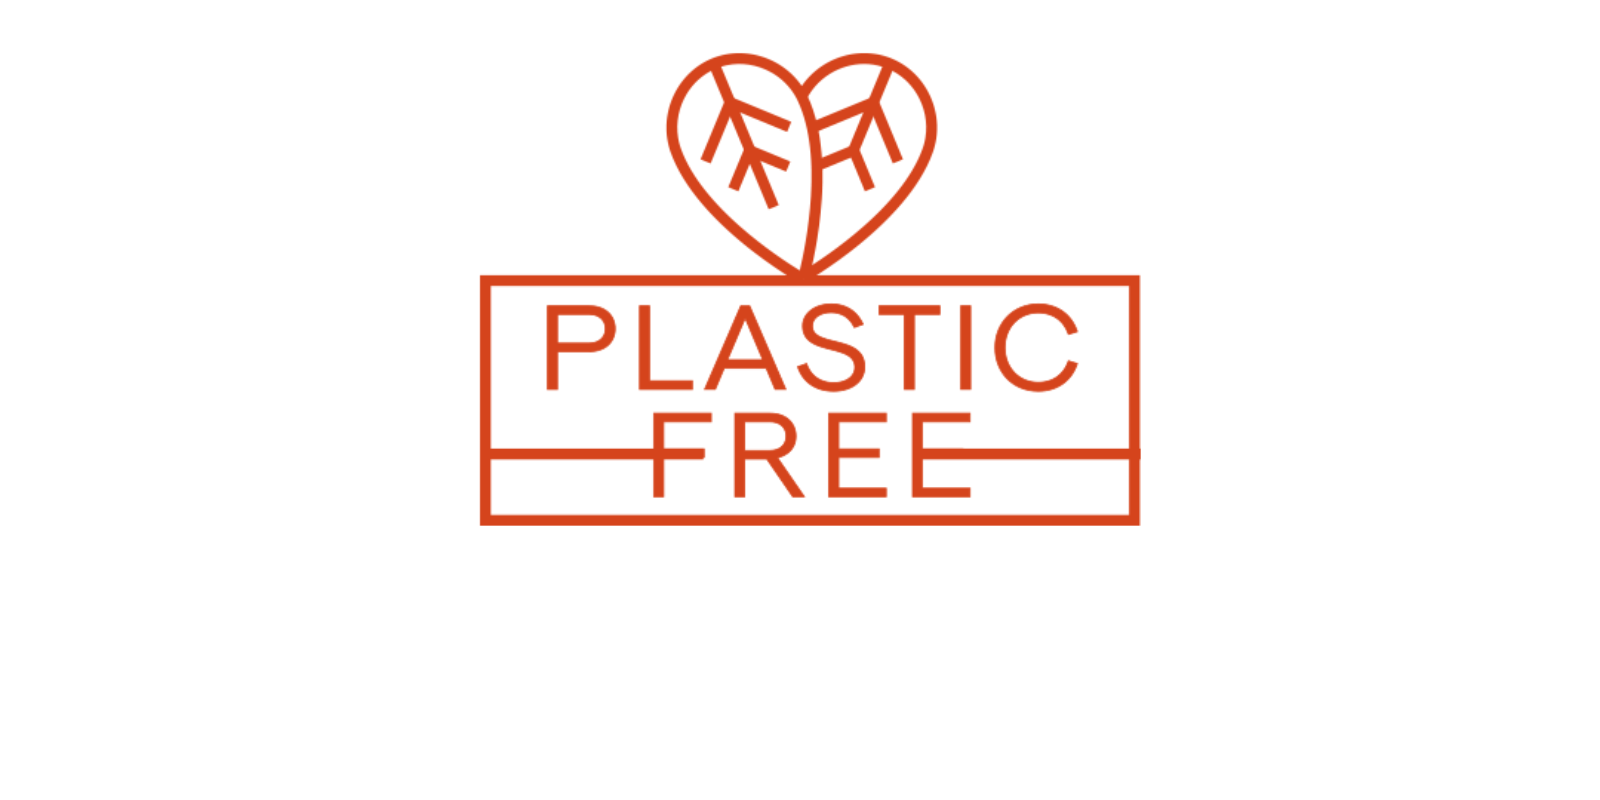 &Better's 'Plastic-Free' logo, indicating the brand's commitment to sustainability and eco-friendly practices by using plastic-free packaging for their personal care products